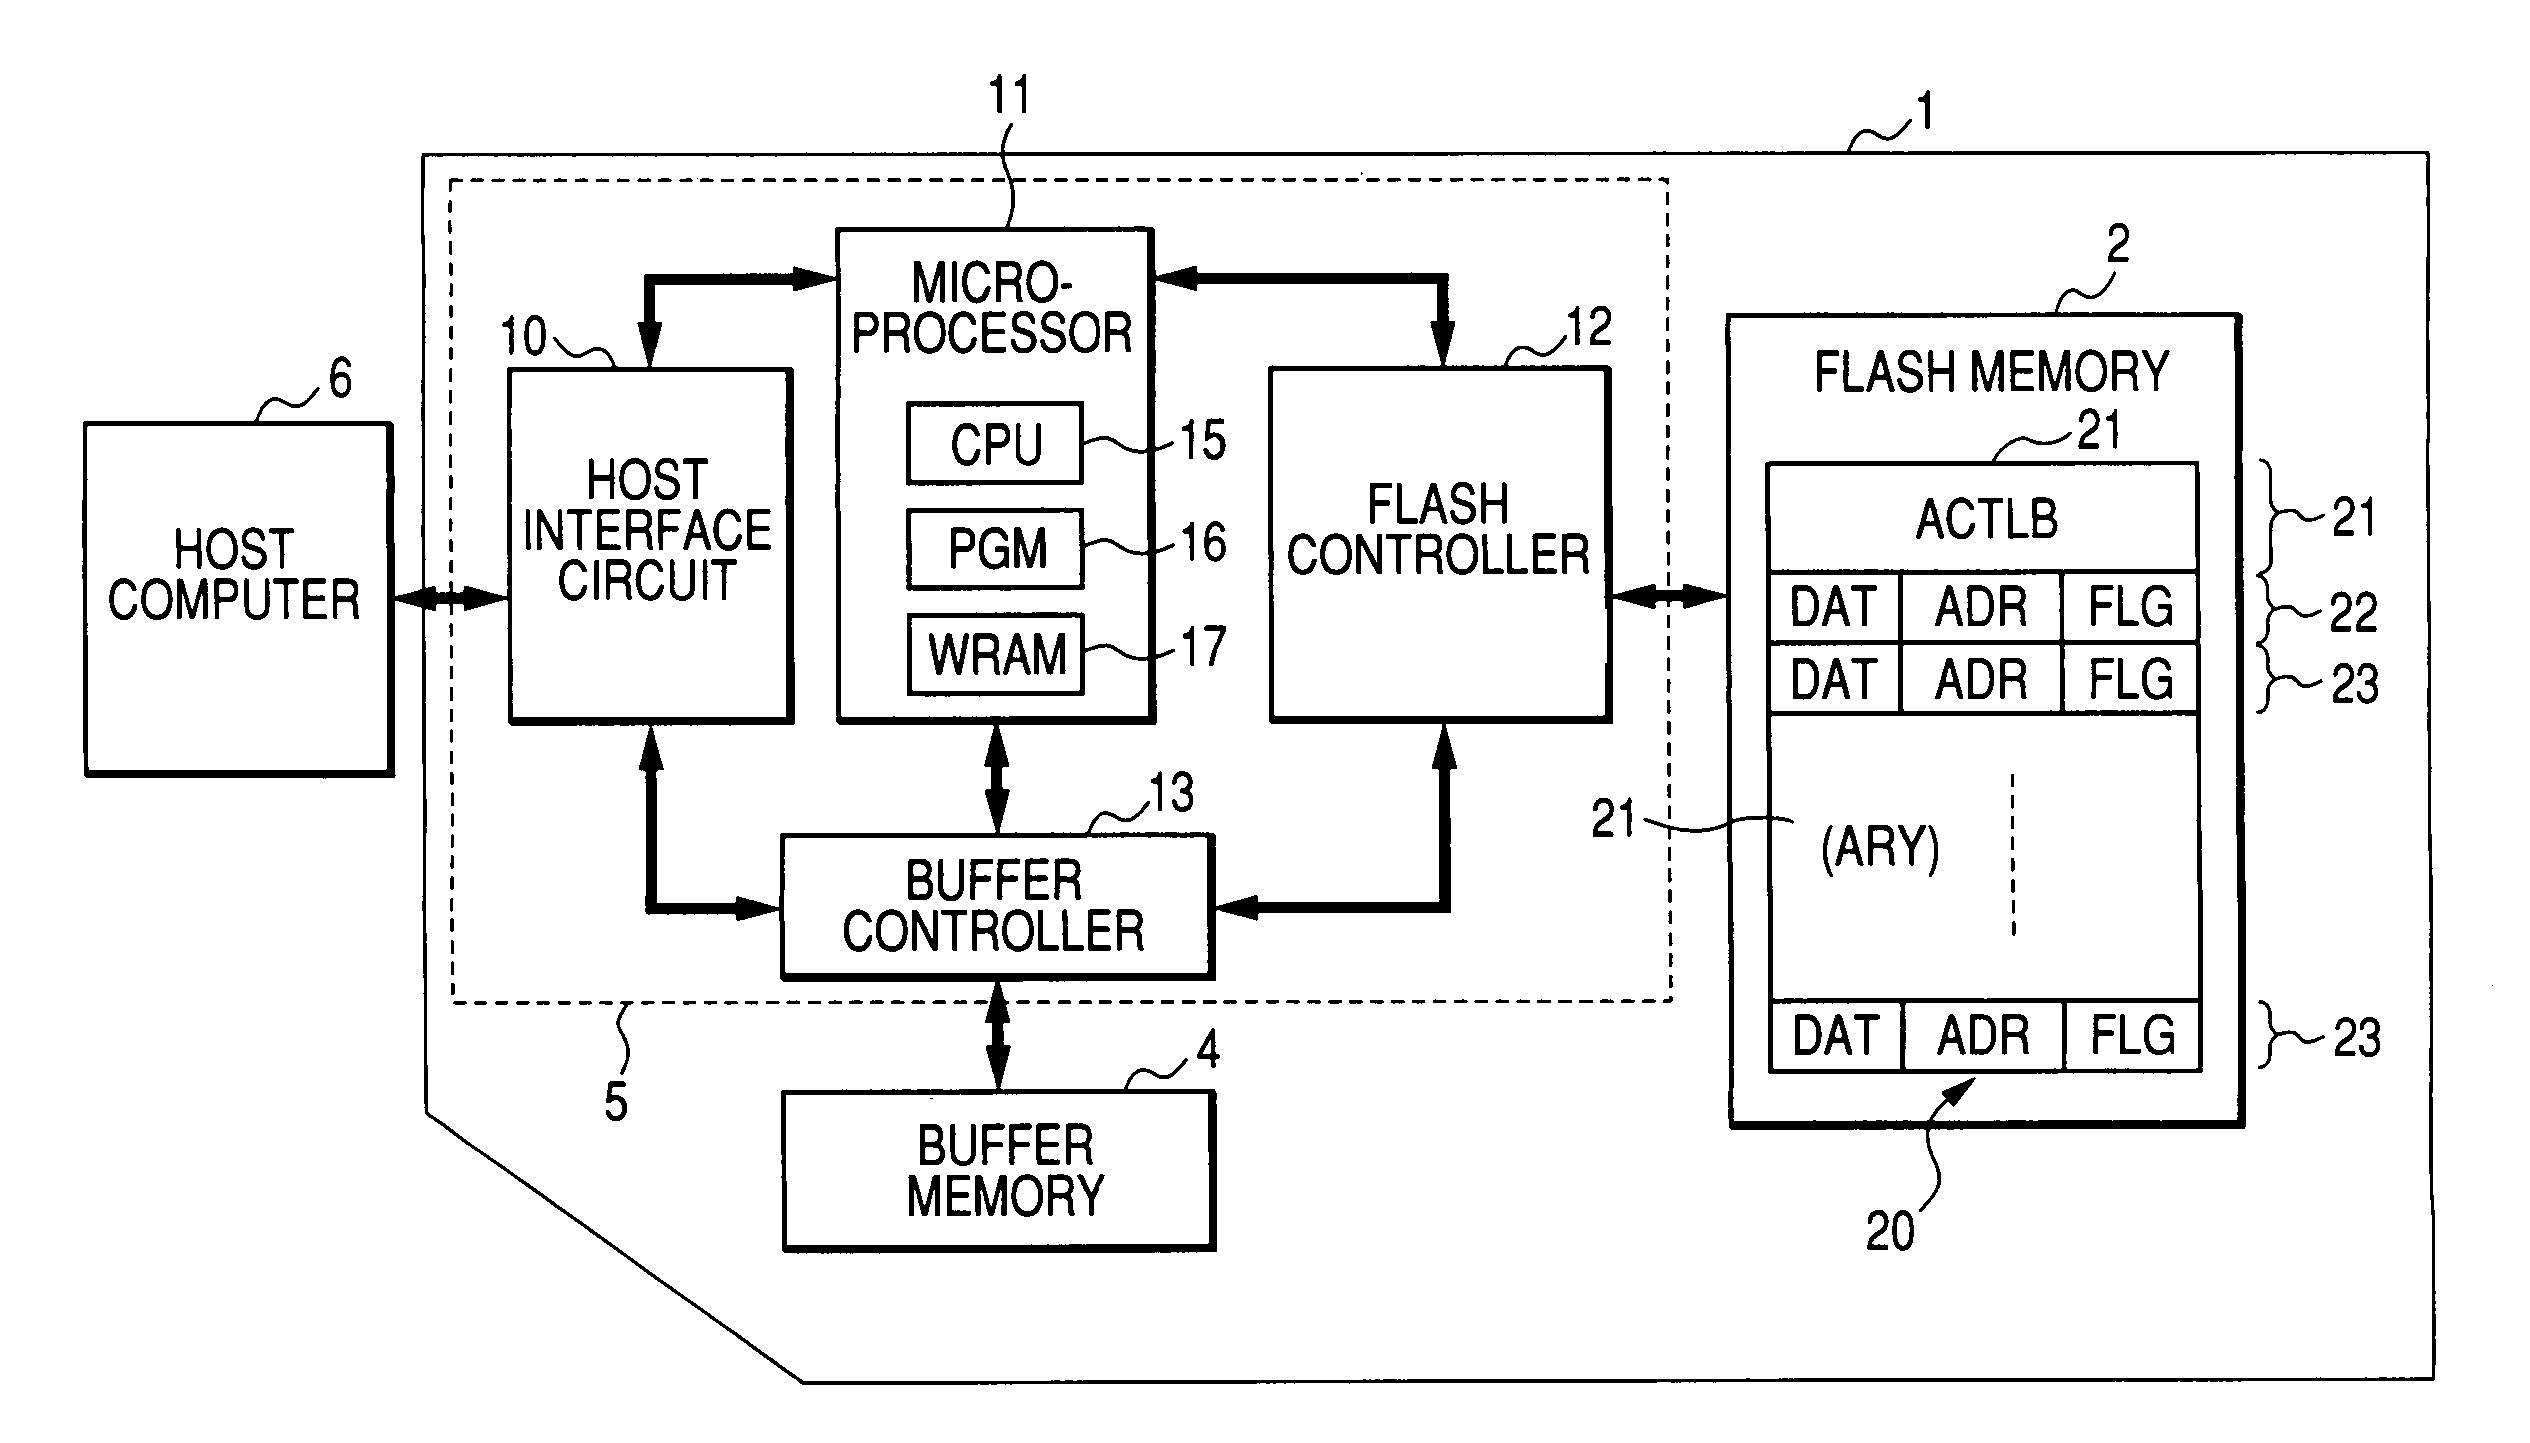 Nonvolatile memory apparatus which prevents destruction of write data caused by power shutdown during a writing process